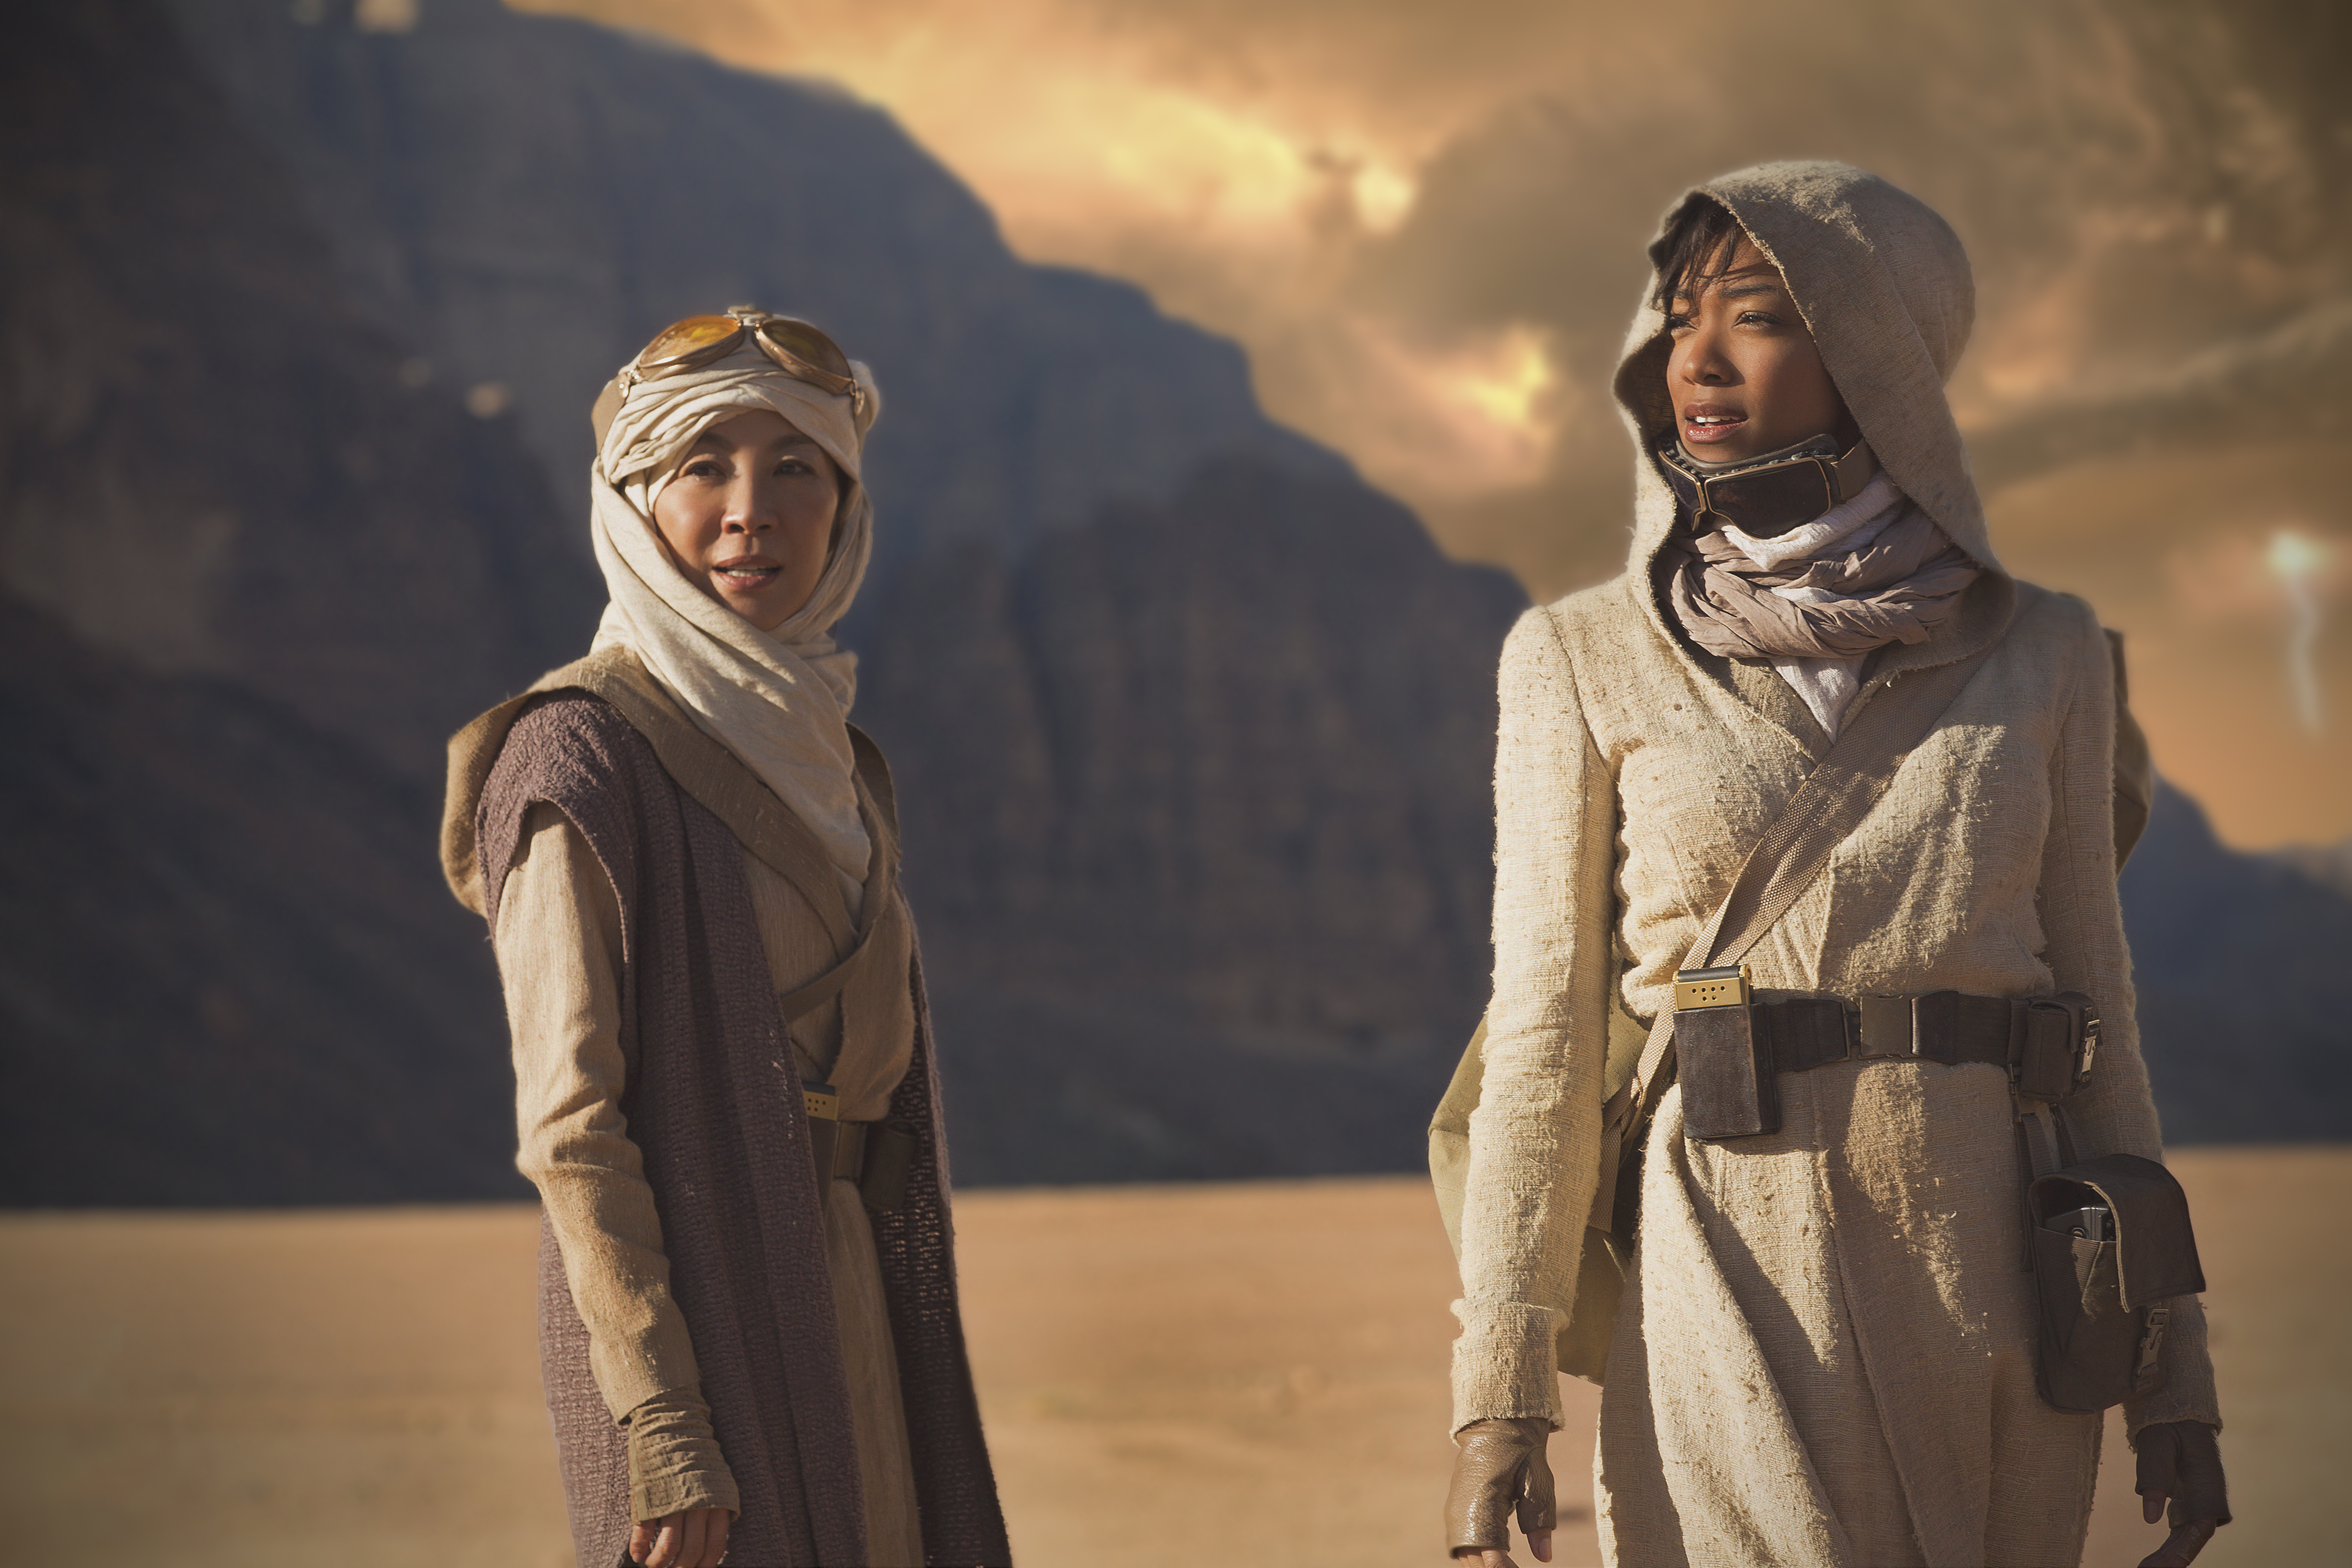 Pictured (l-r): Michelle Yeoh as Captain Philippa Georgiou;  Sonequa Martin-Green as First Officer Michael Burnham. STAR TREK: DISCOVERY coming to CBS All Access. Photo Cr: Dalia Naber.  ï¿½ 2017 CBS Interactive. All Rights Reserved.